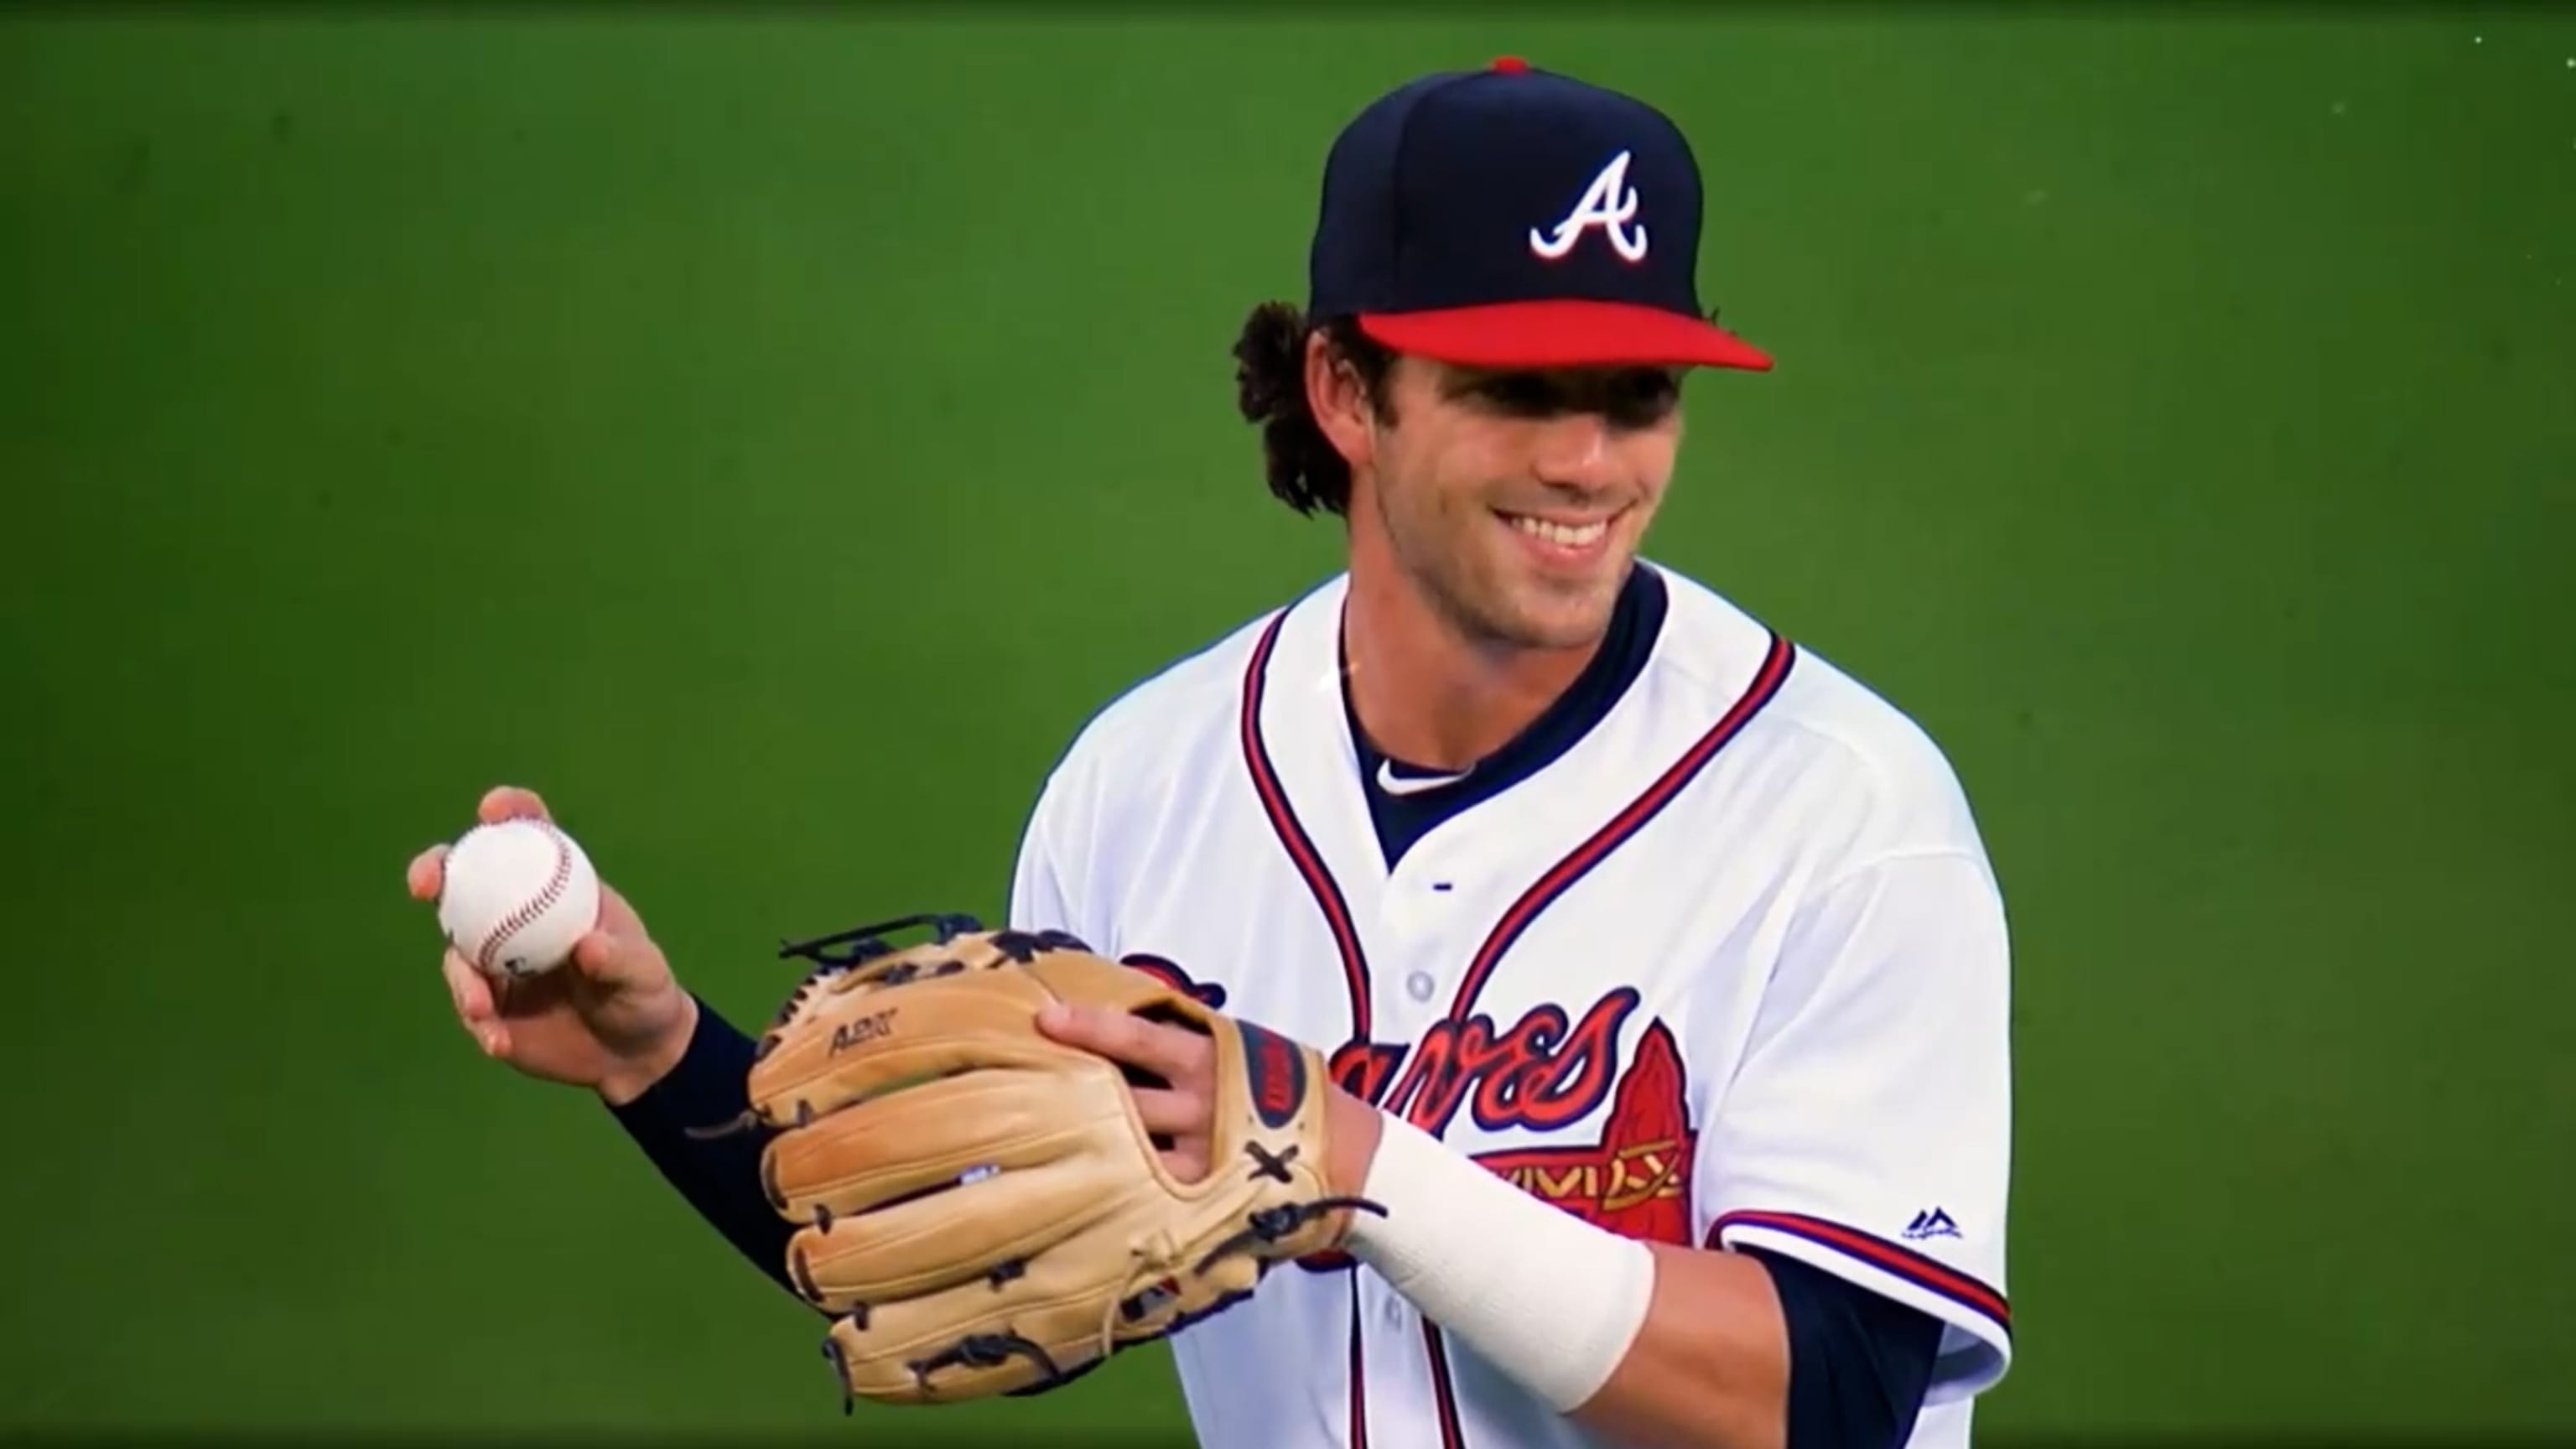 Cobb native Dansby Swanson returns home with Cubs, Atlantabraves